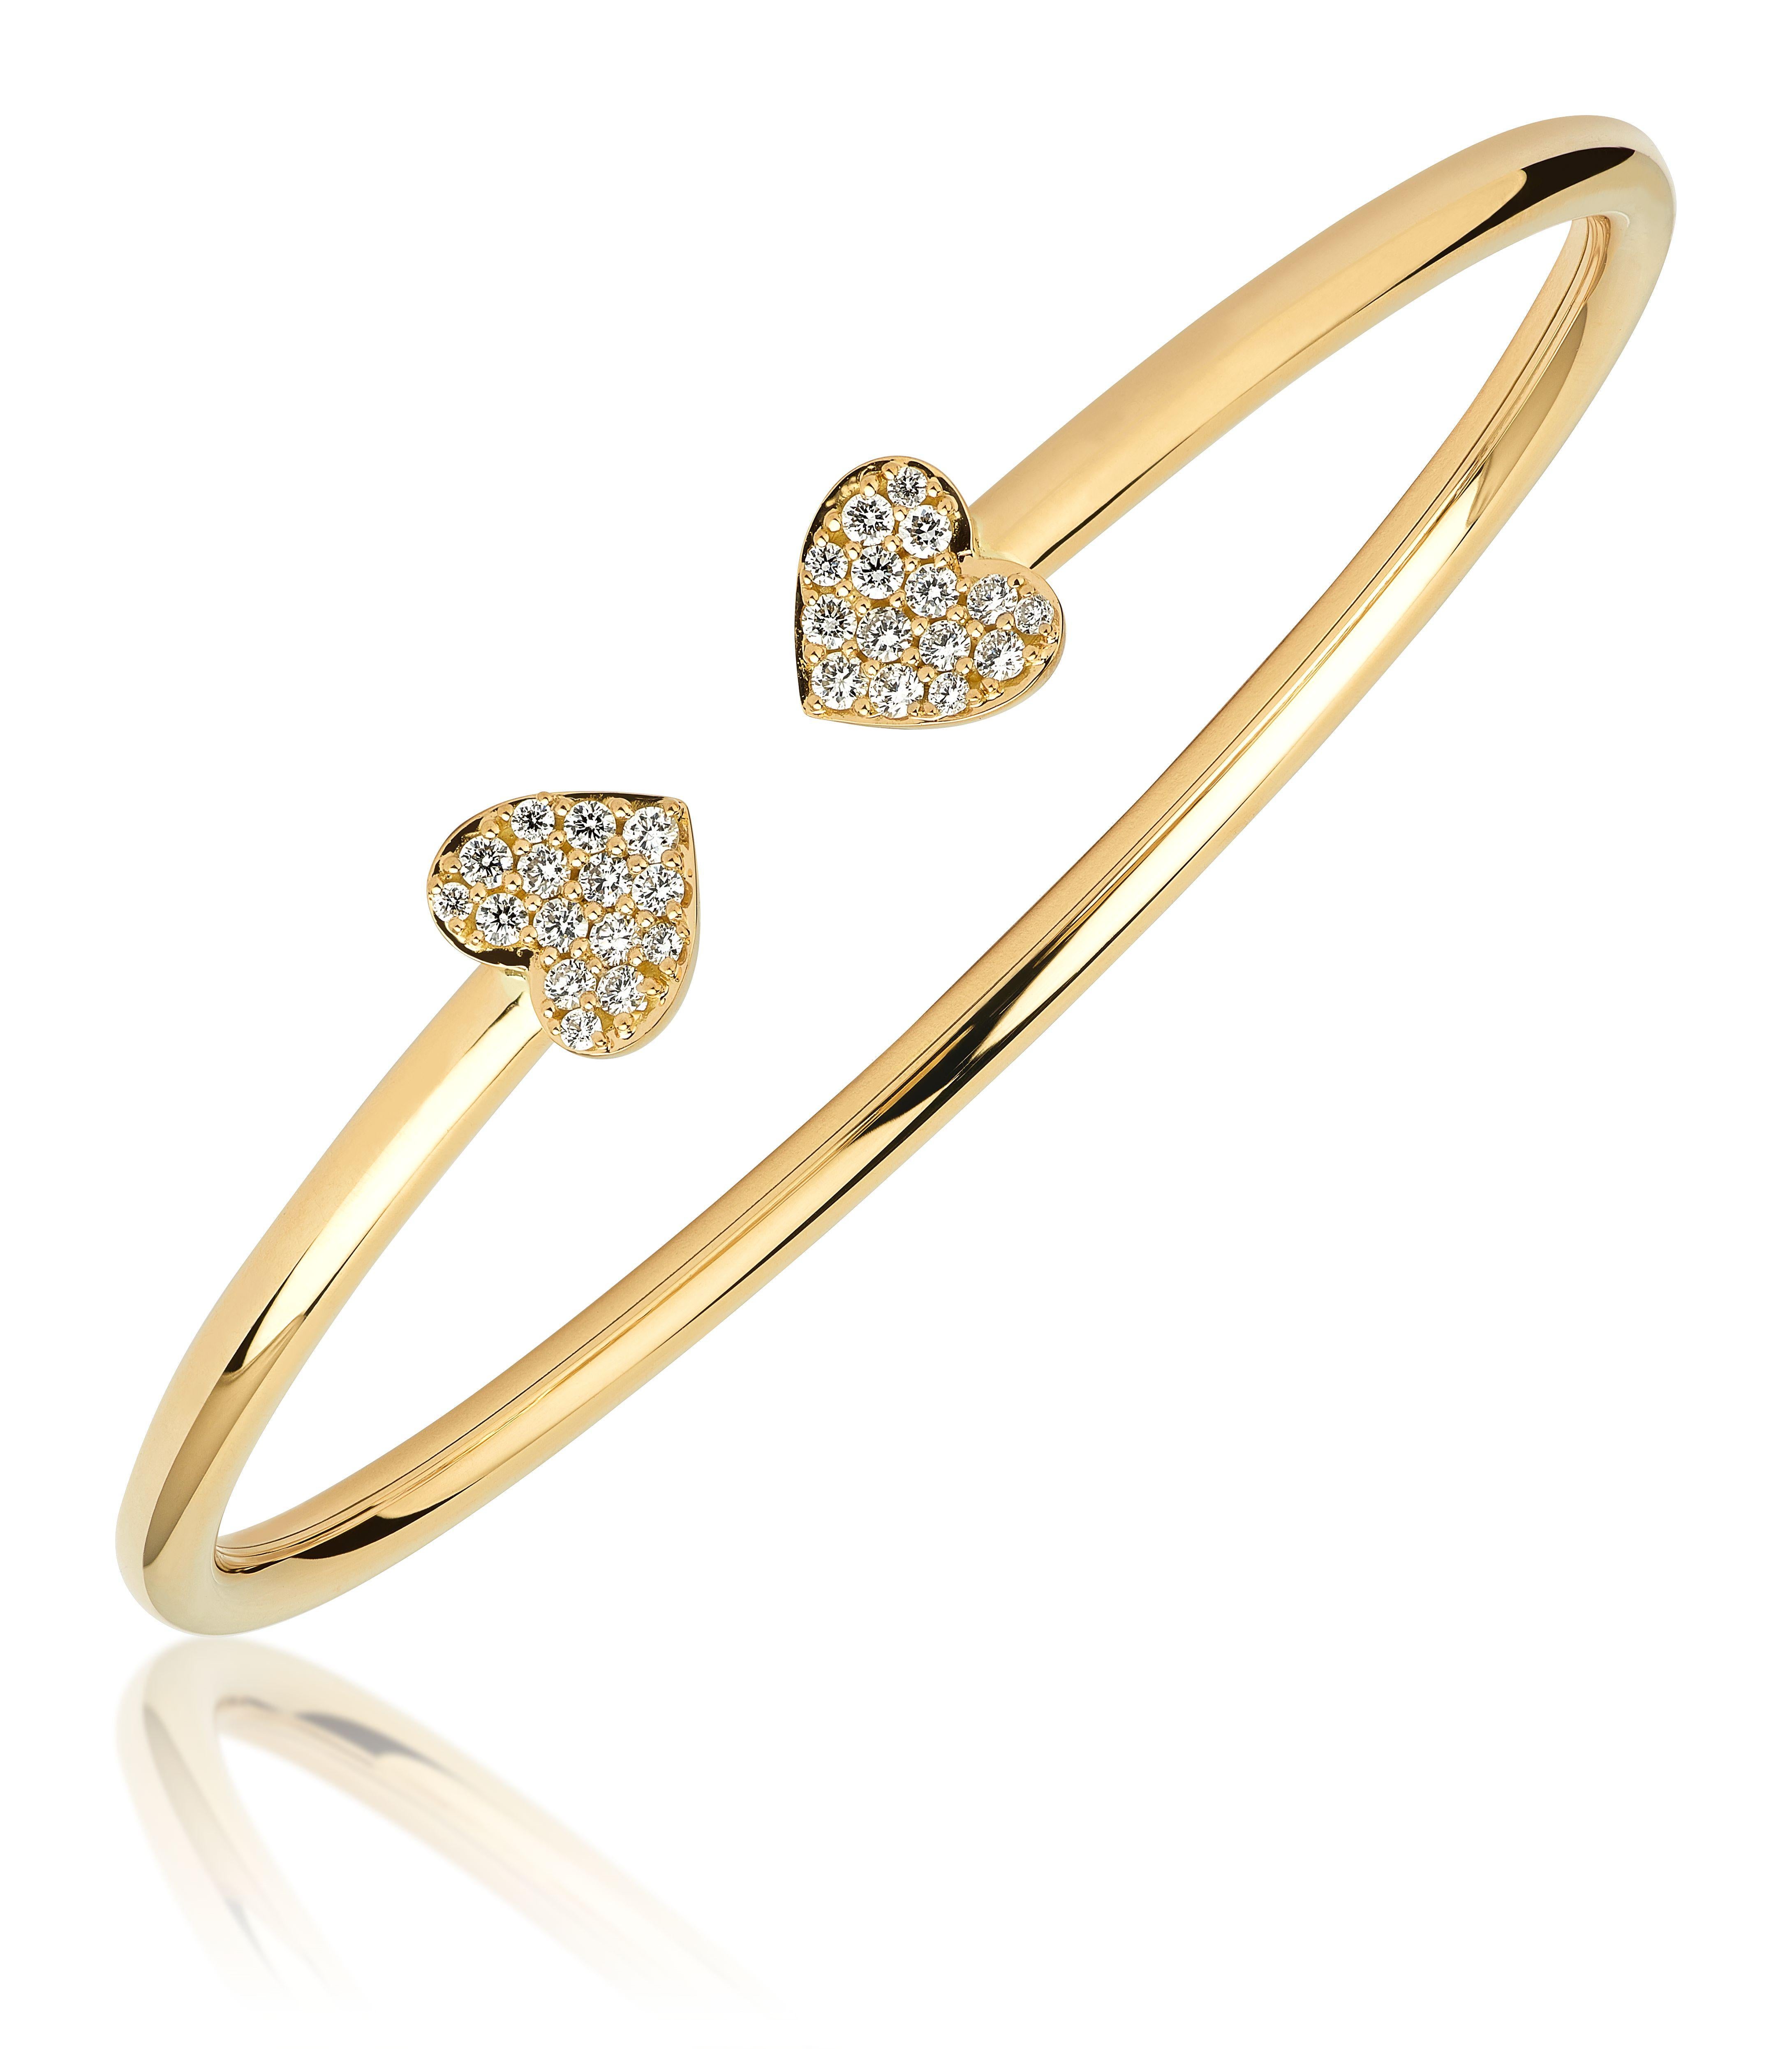 Designed with a hint of whimsy, the Hearts Collection includes pieces, in 18k gold with diamond accents that can be worn individually or stacked together for a romantic and playful everyday look
